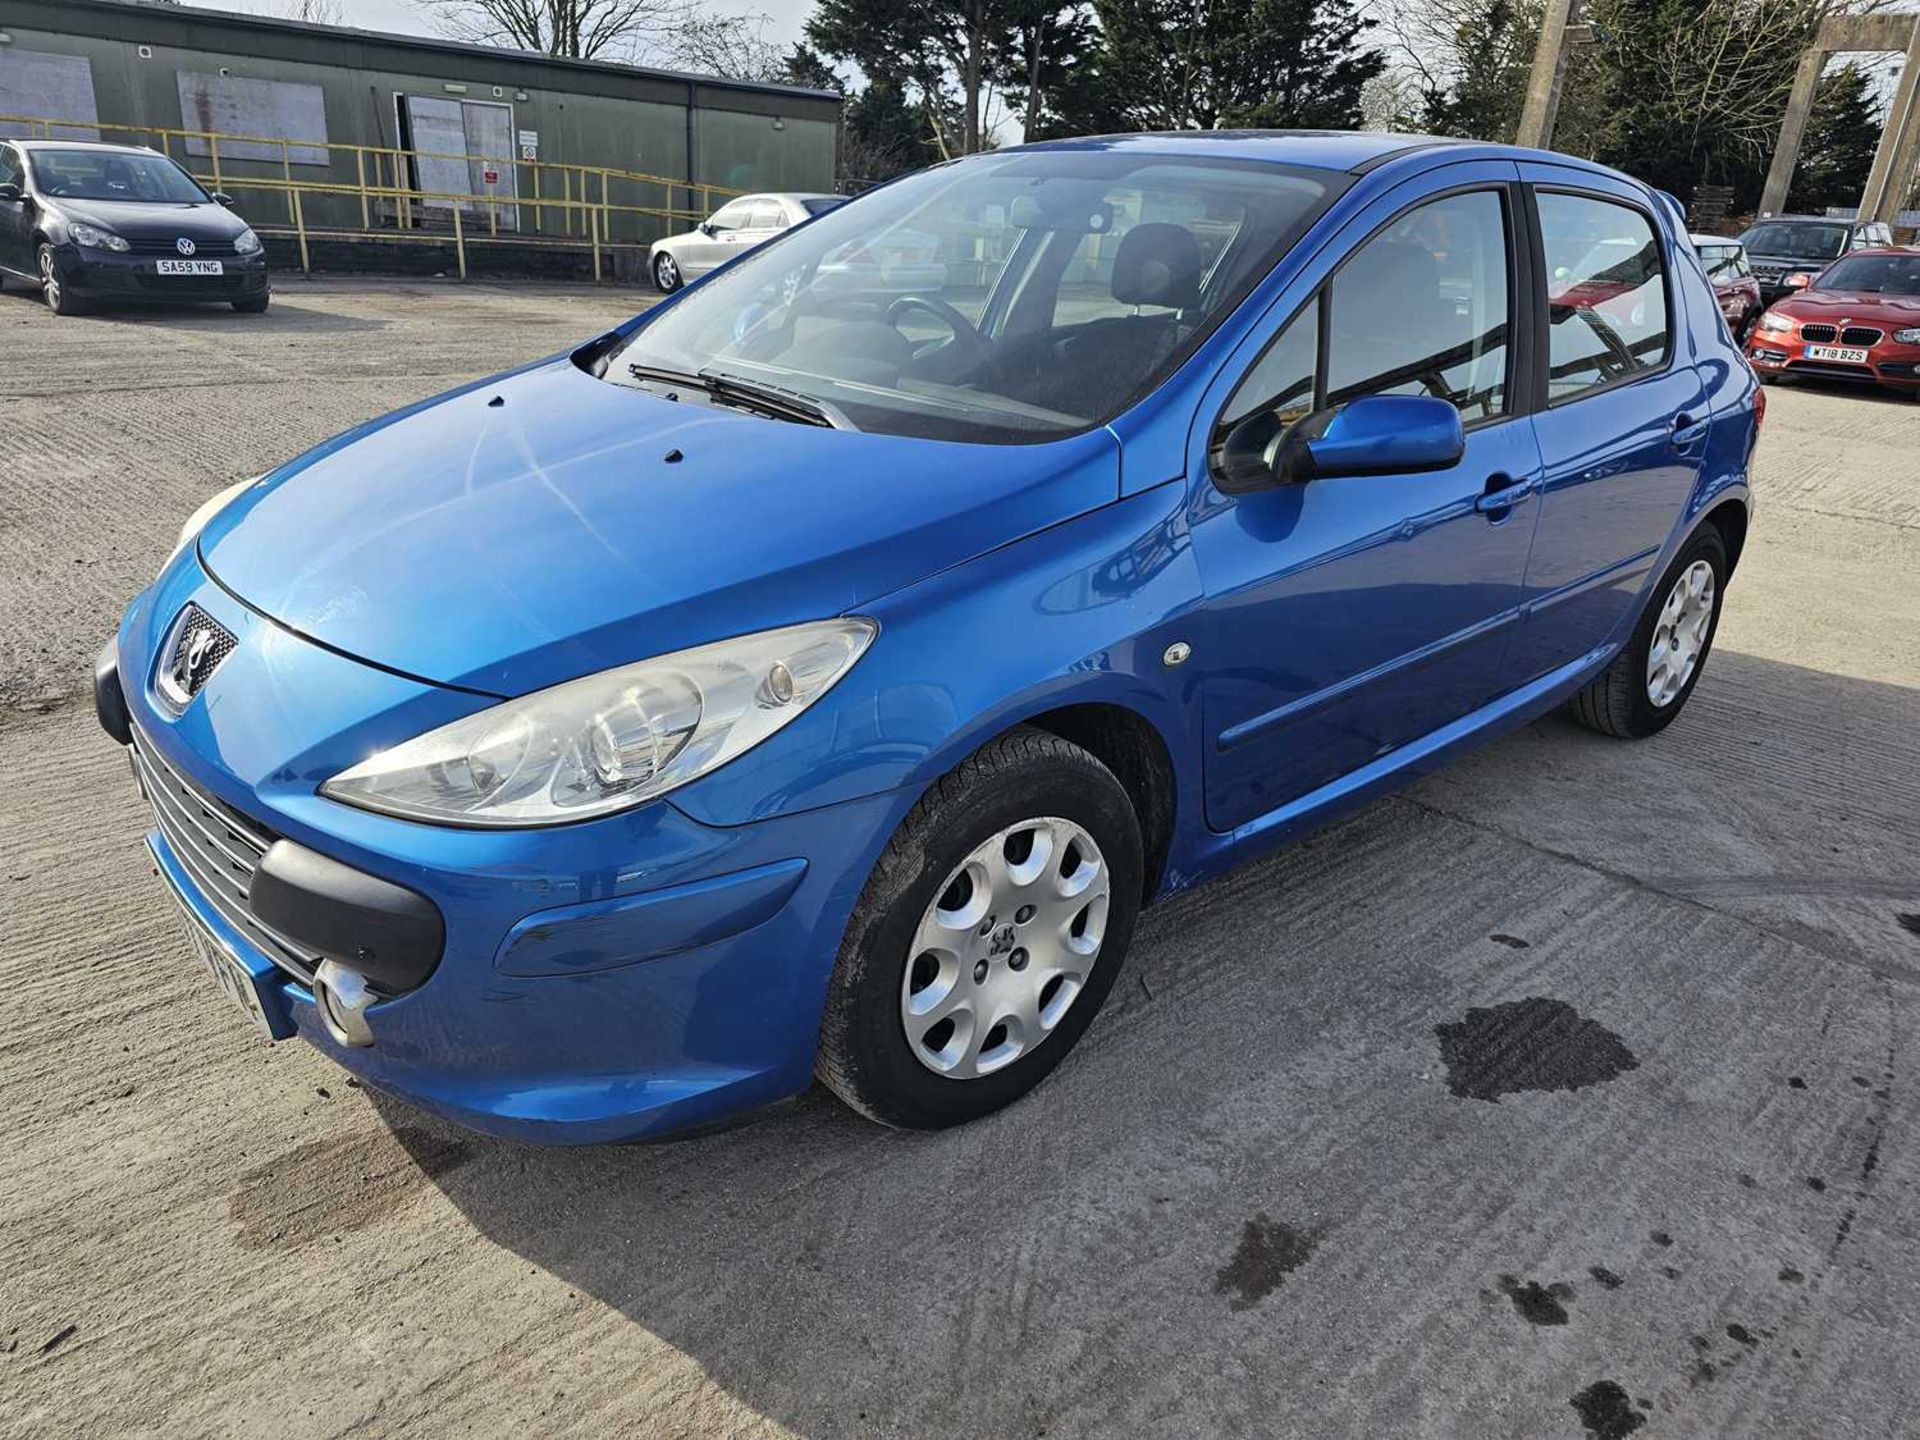 2007 Peugeot 307 X-line, 5 Speed, A/C (Reg. Docs. & Service History Available, Tested 07/24) - Image 29 of 56